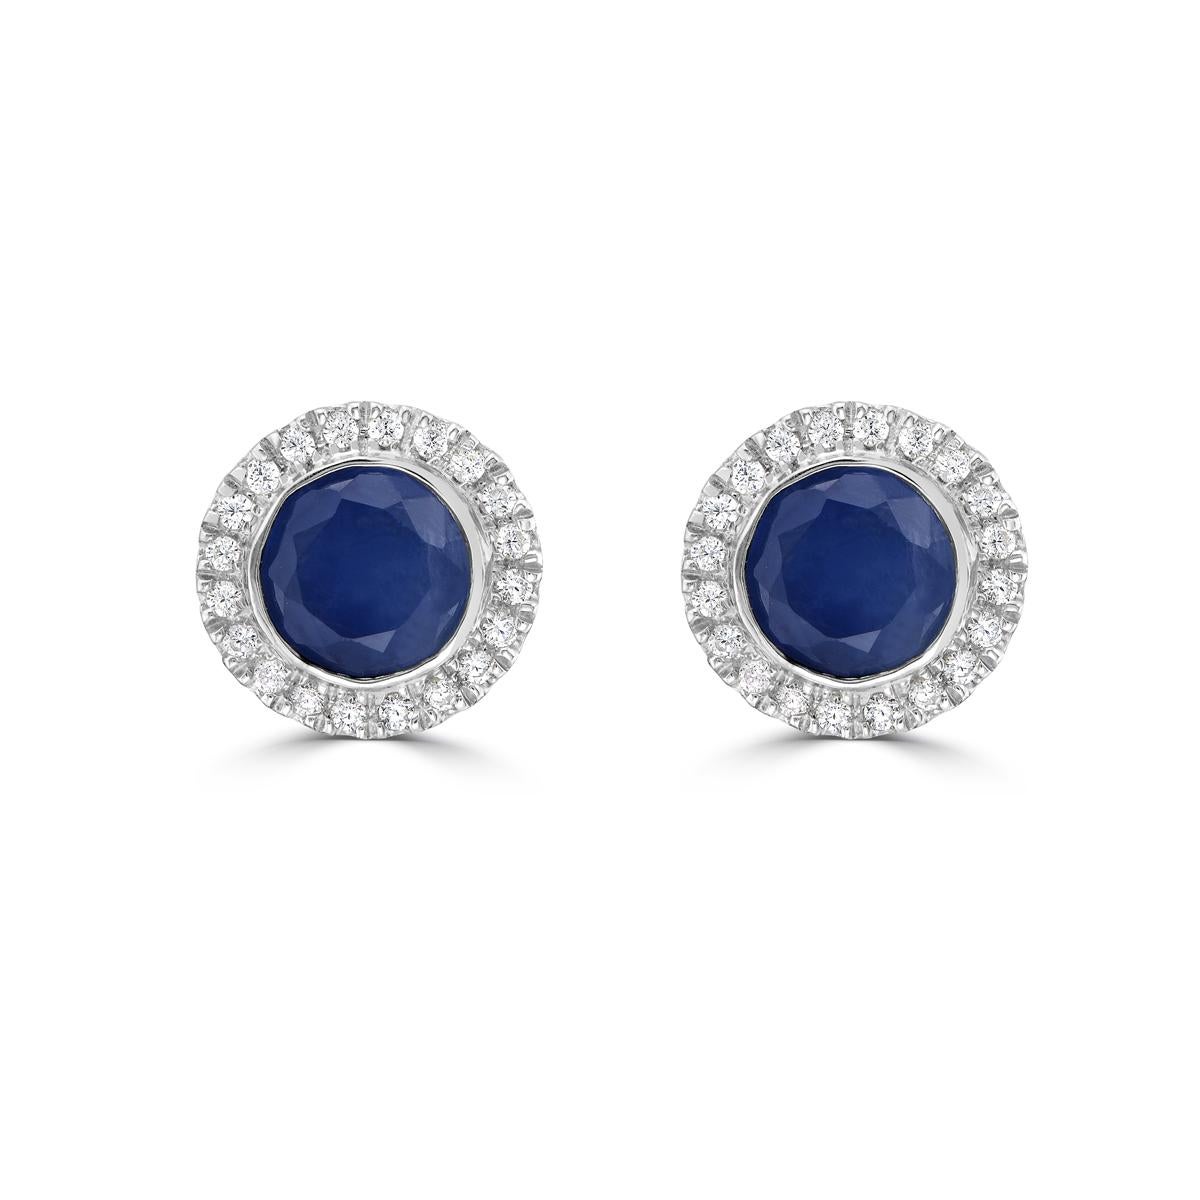 Indulge in luxury with our Blue Sapphire and Diamond Halo Stud Earrings in 14K White Gold. Featuring stunning round blue sapphires, these sapphire stud earrings exude sophistication and exclusivity. The dazzling halo design with accompanying